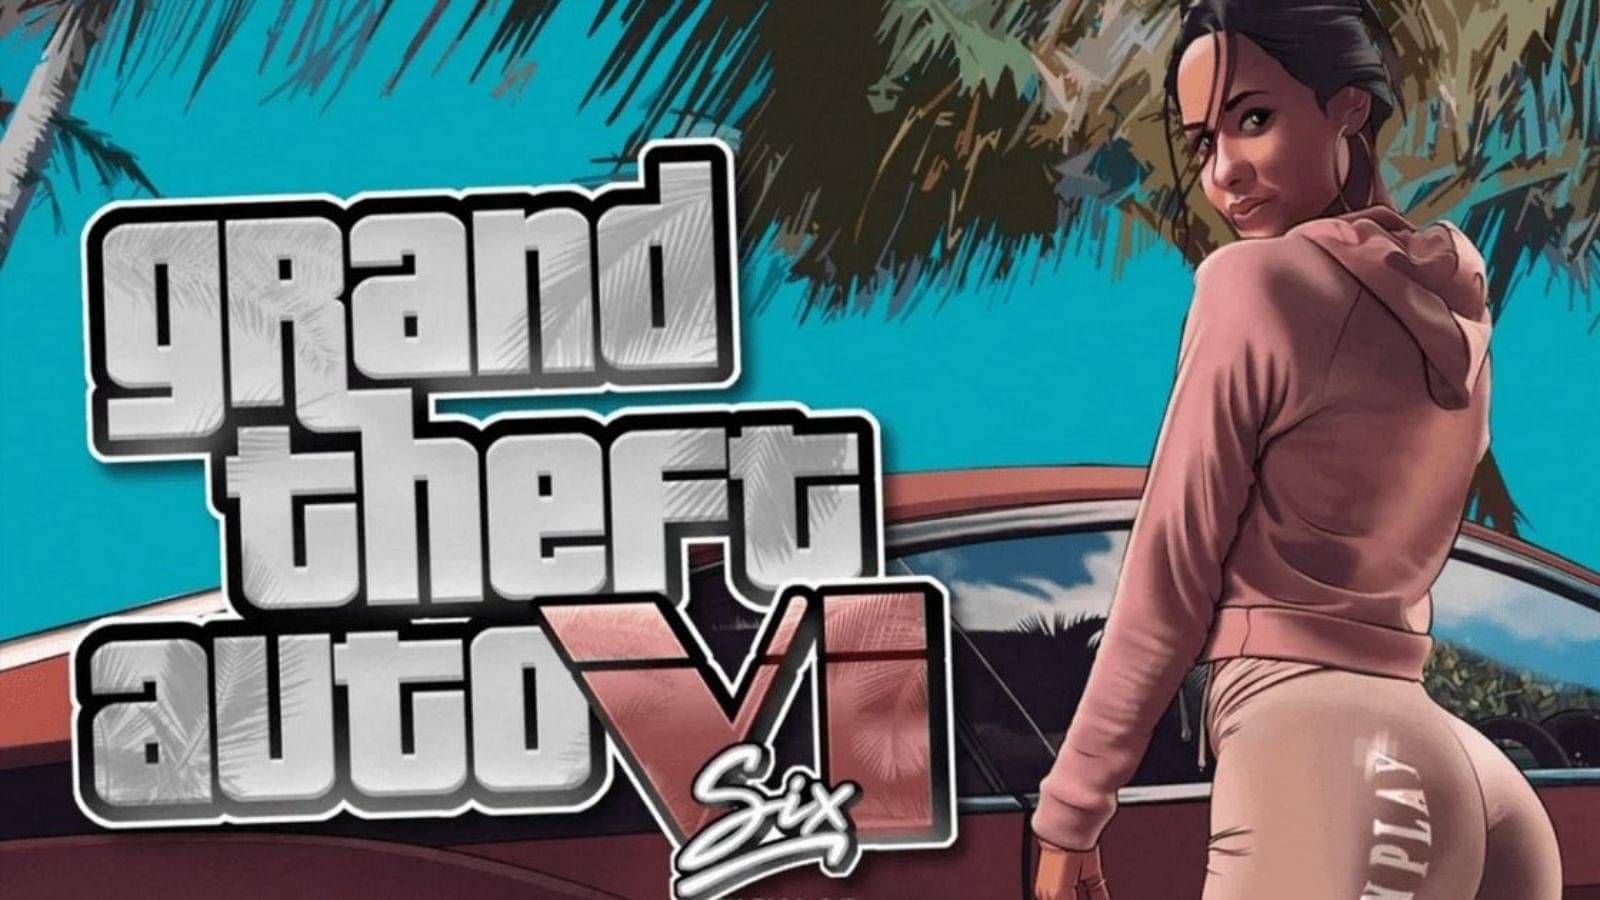 With the first trailer on its way, when will GTA 6 release? - The SportsRush